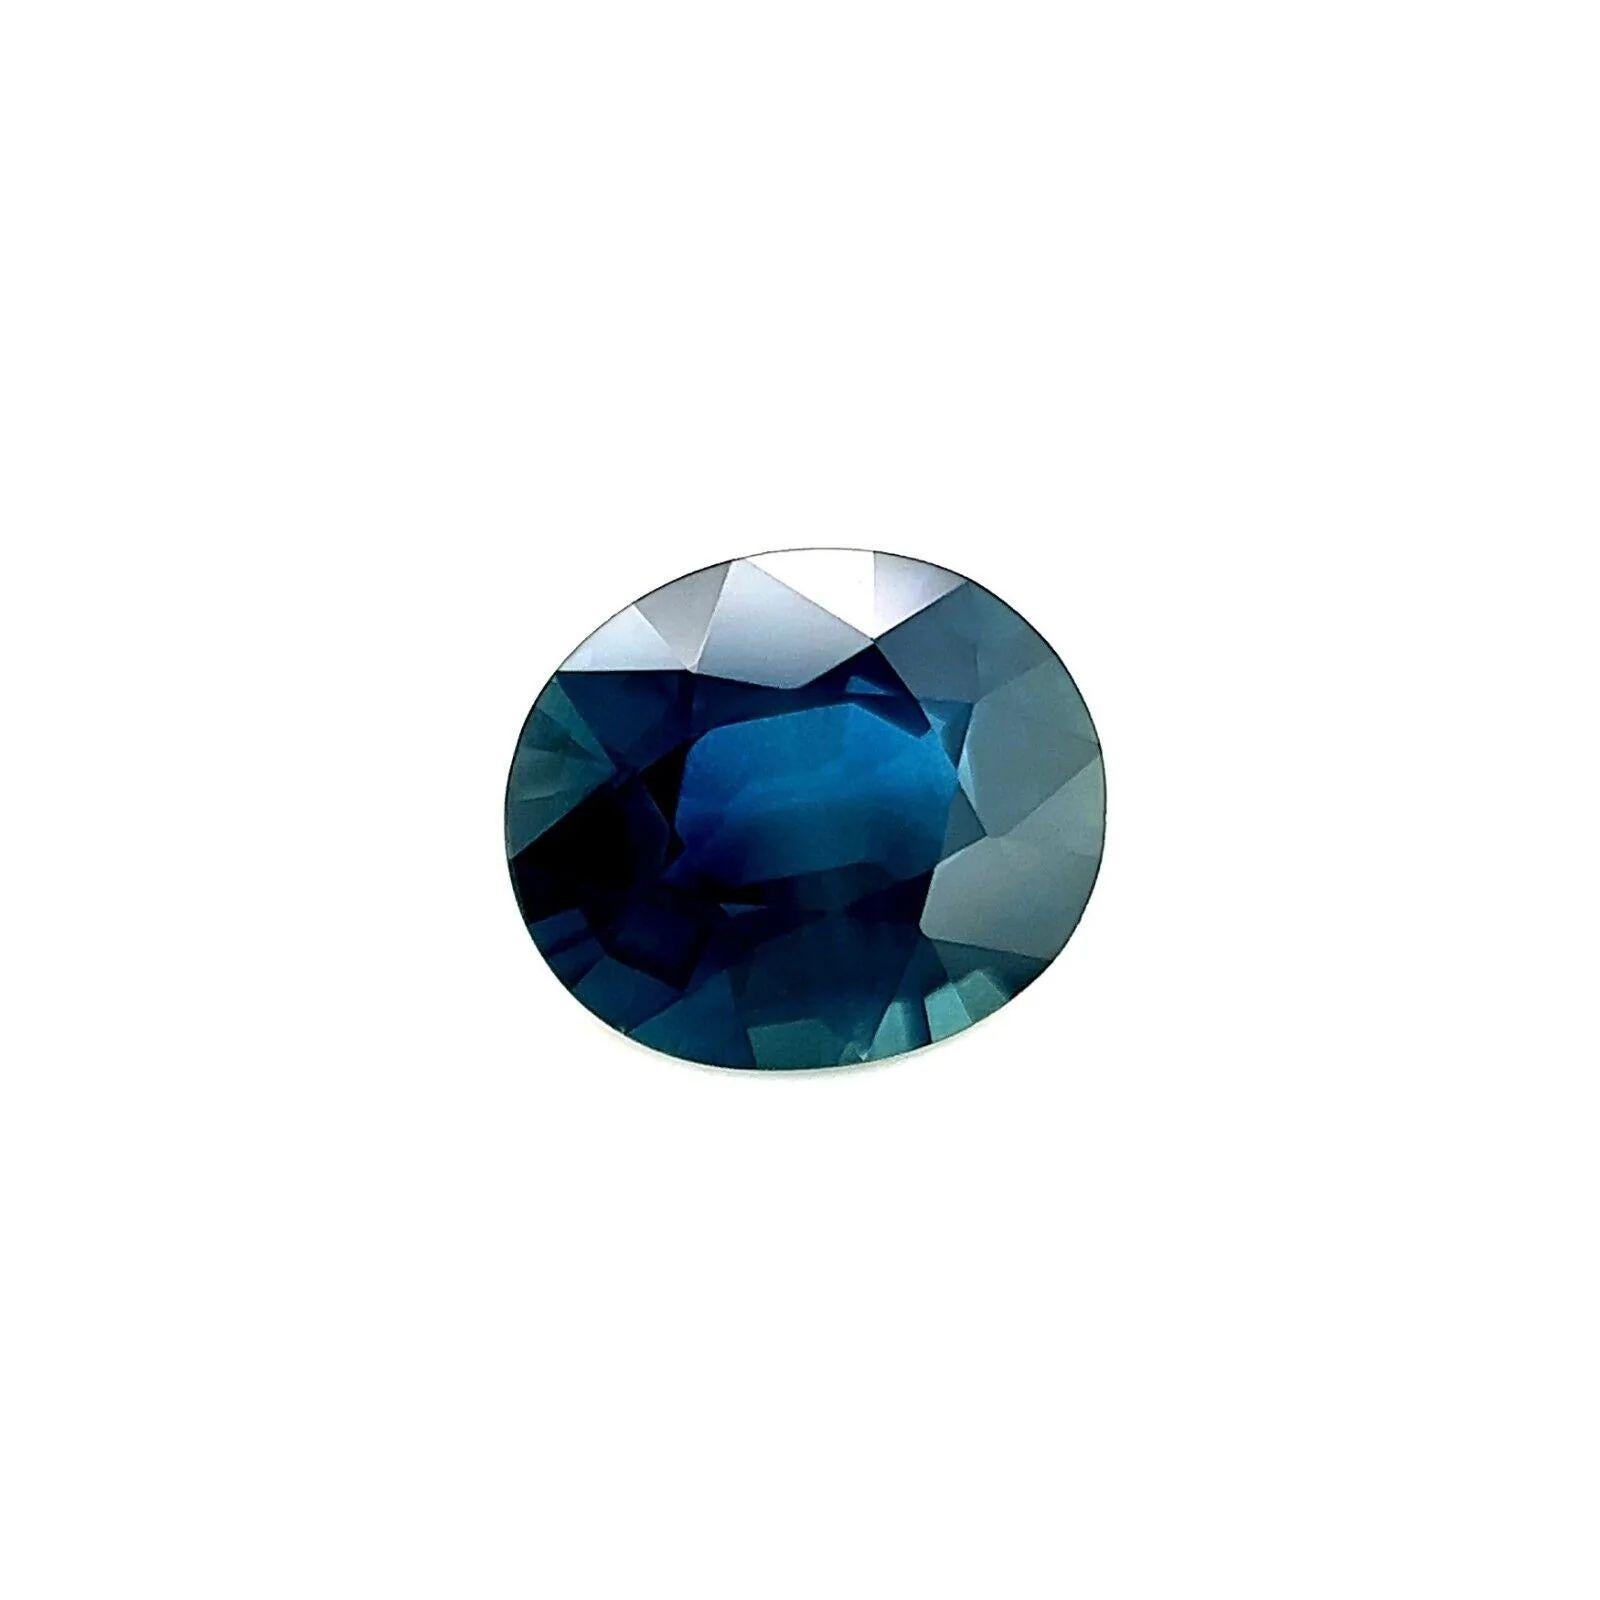 Natural Deep Blue Sapphire 1.45ct Oval Cut Loose Gemstone 7.4x6.2mm

Natural Deep Blue Sapphire Gemstone.
1.45 Carat with a deep blue colour and very good clarity. Only some small natural inclusions visible when looking closely. Also has an